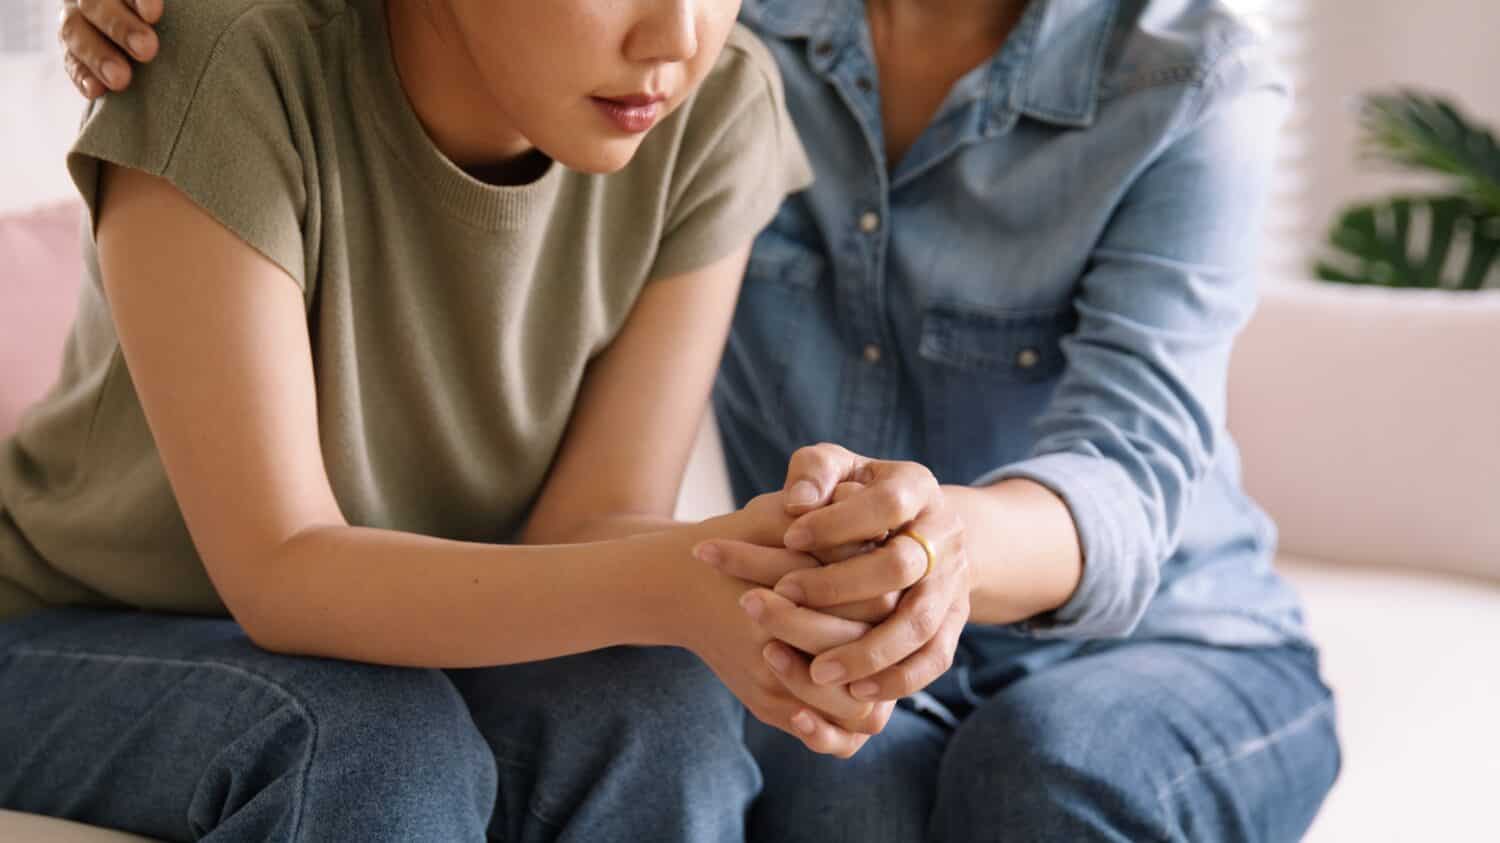 Middle aged asia people old mom holding hands trust comfort help young woman talk crying stress relief at home. Mum as friend love care hold hand adult child feel pain sad worry of life crisis issues.